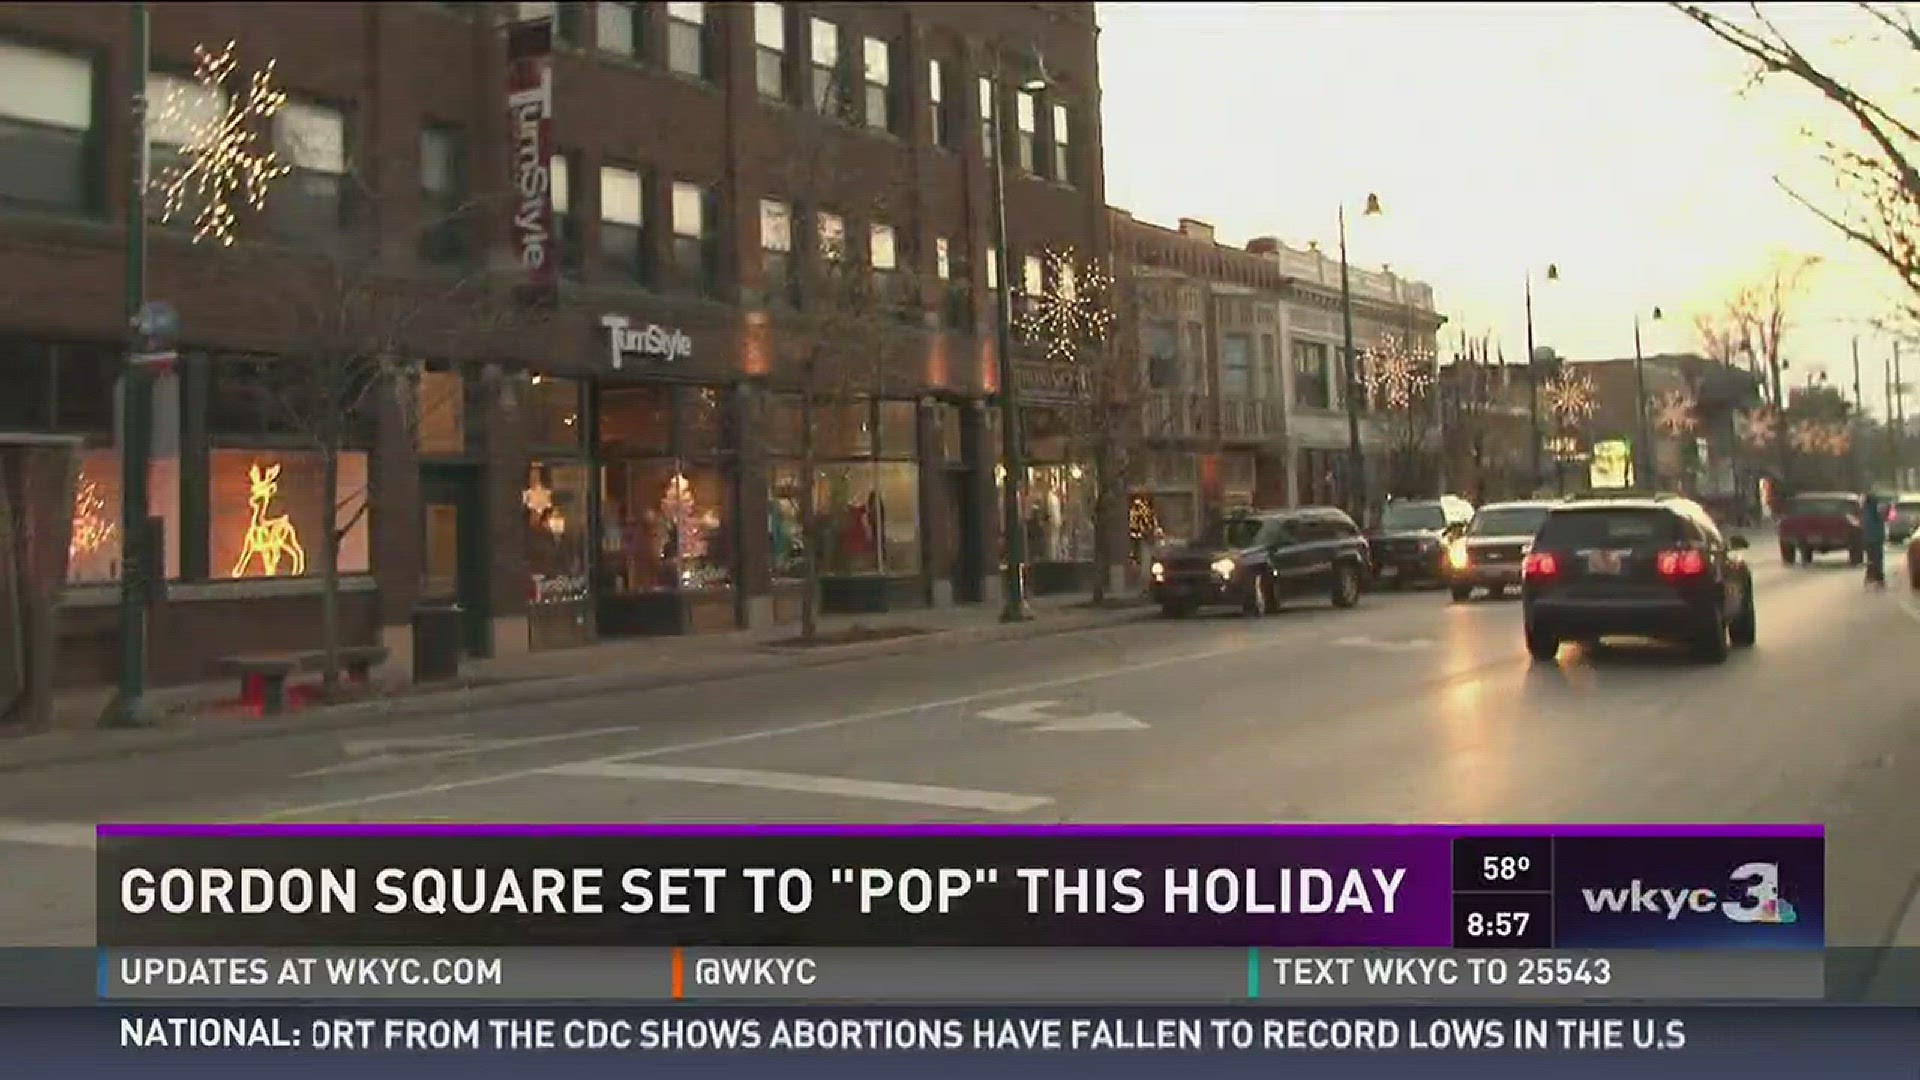 Find clothing, toys and other holiday gifts at one of the winning pop-up shops in Gordon Square.